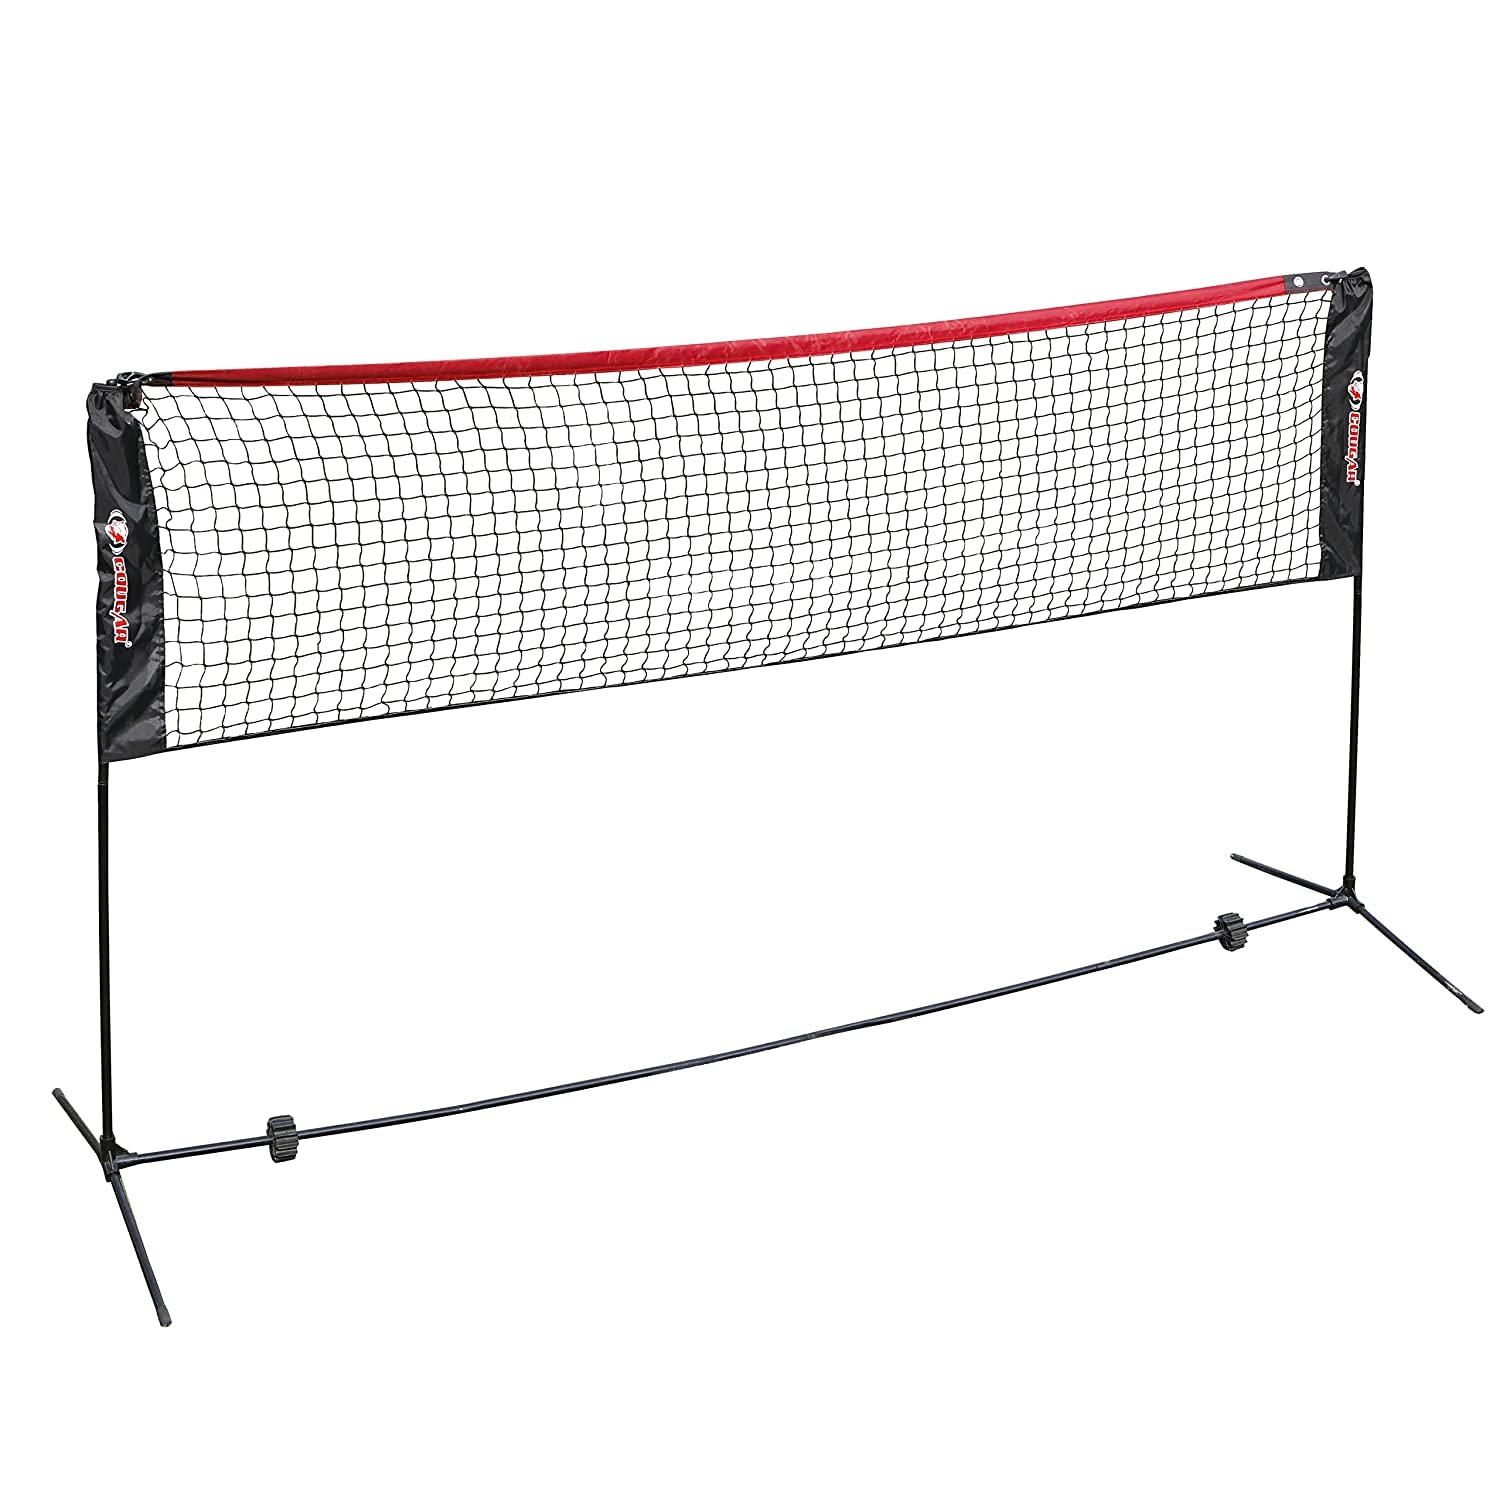 Cougar Outdoor Badminton Kids Net Set with Foldable Stand Poles and Carry Bag